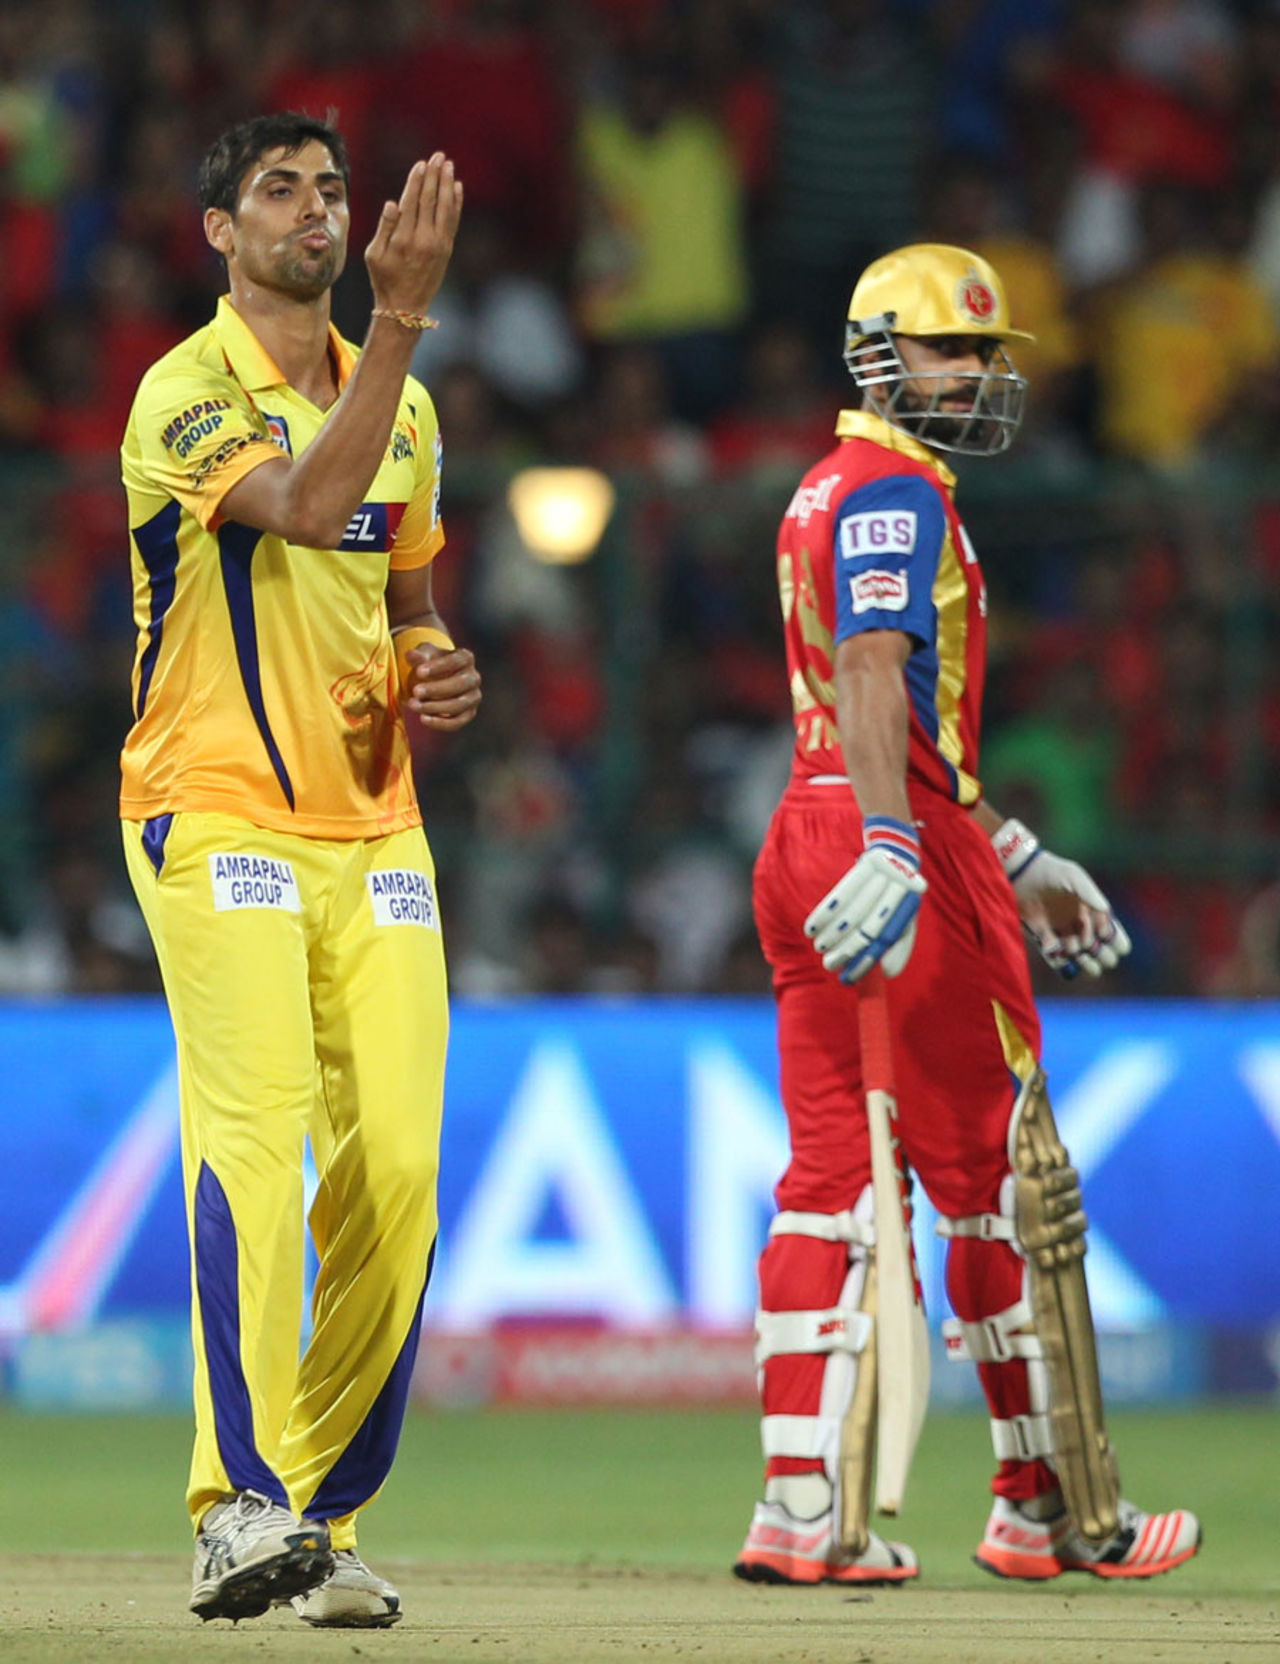 Ashish Nehra finished with a career-best 4 for 10, Royal Challengers Bangalore v Chennai Super Kings, IPL 2015, Bangalore, April 22, 2015